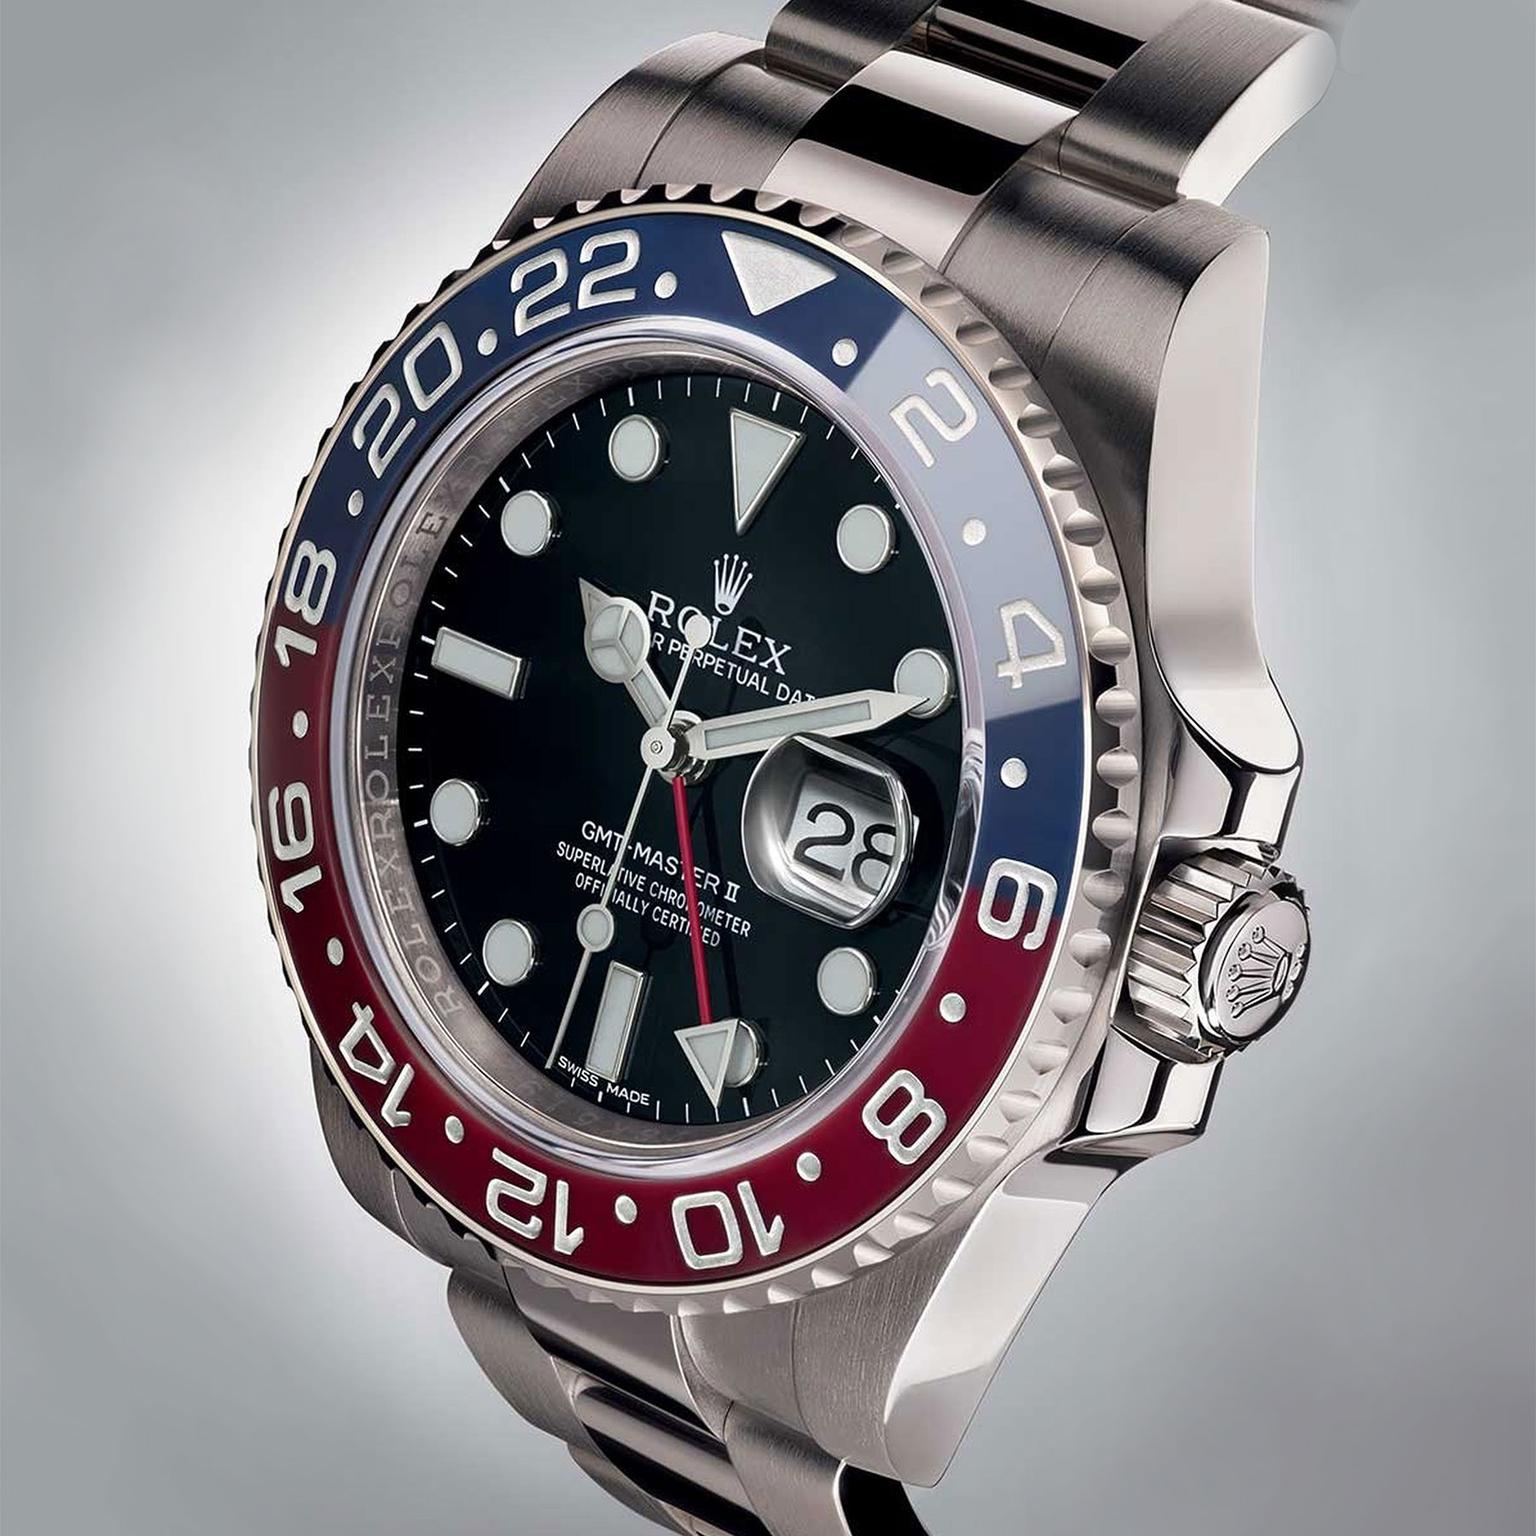 Oyster Perpetual GMT-Master II with a 